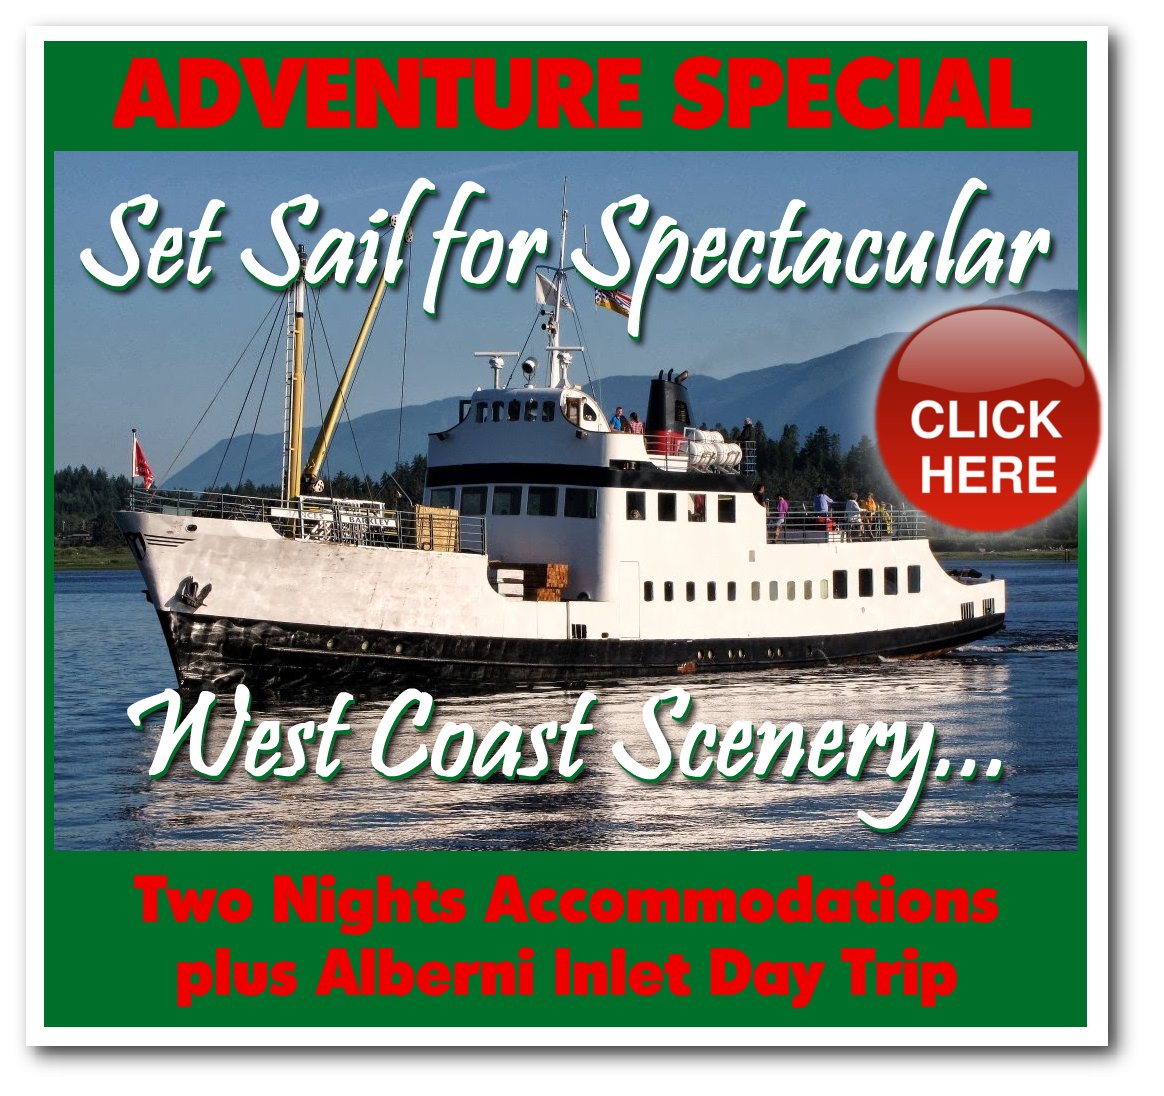 Edelweiss Bed and Breakfast Adventure Special